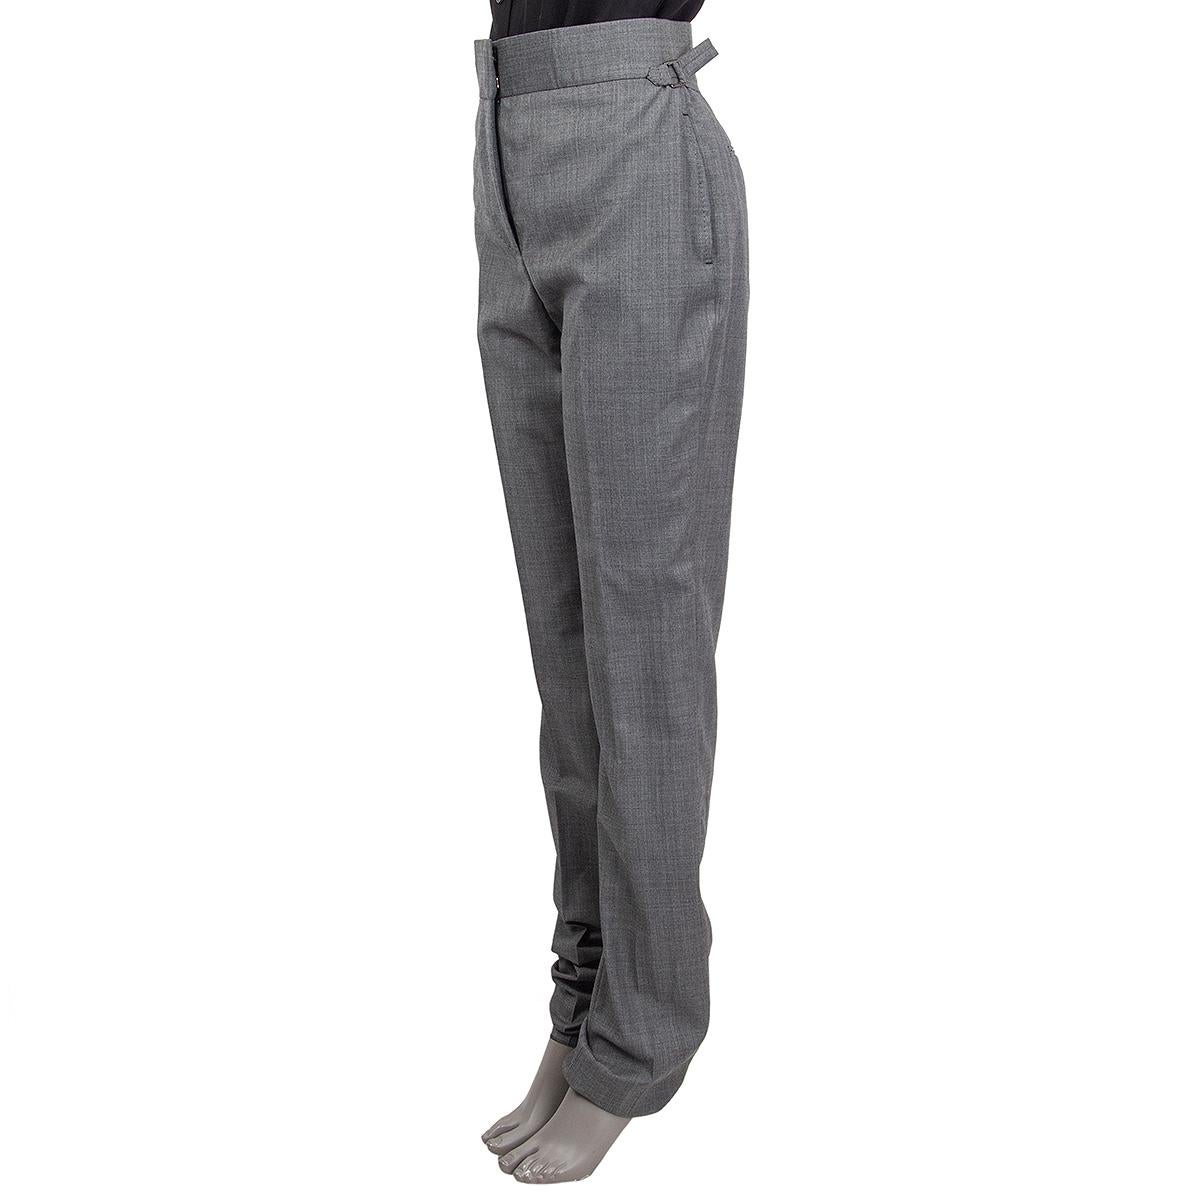 100% authentic Tom Ford high-waisted slim pants in grey cool wool blend (assumingly as content tag is missing). Two side and to slit back pockets. Open with hidden hooks, zipper and button. Unlined. Undone hem at the bottom. Have been worn and are